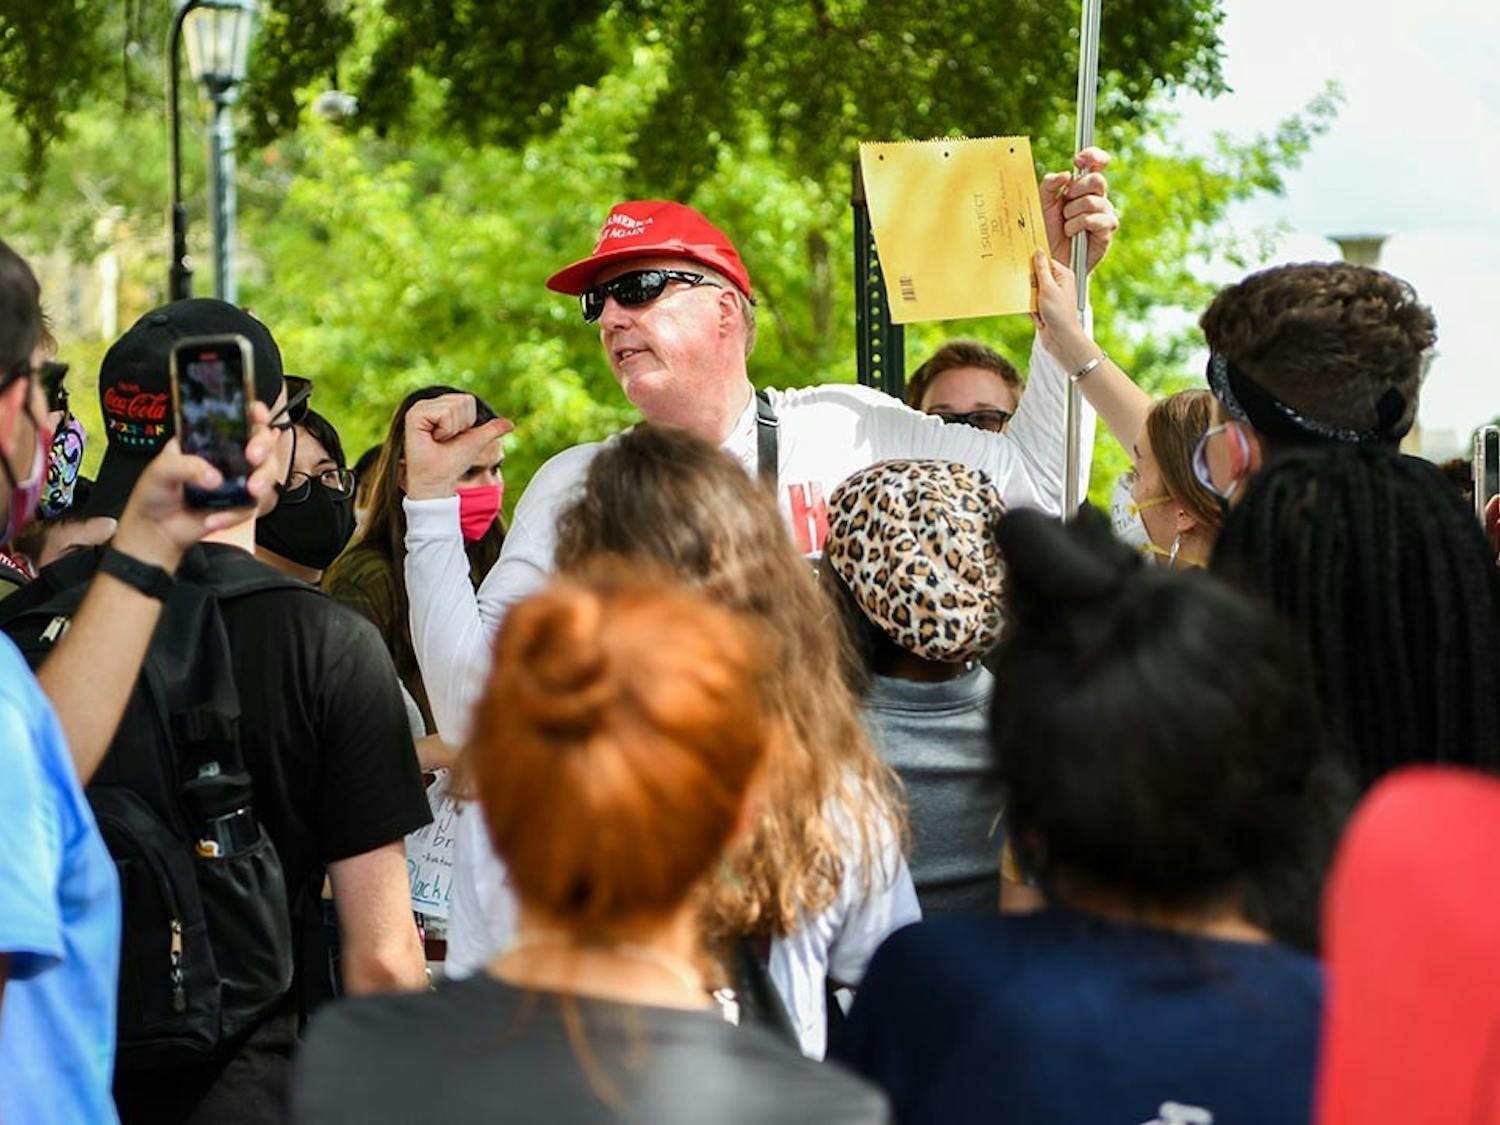 Jim Gilles preaches to students protesting his presence on Greene Street Friday, Aug. 21. Pictured is him saying, “I see the intelligence level getting lower and lower,” after a student tried to reason with him.